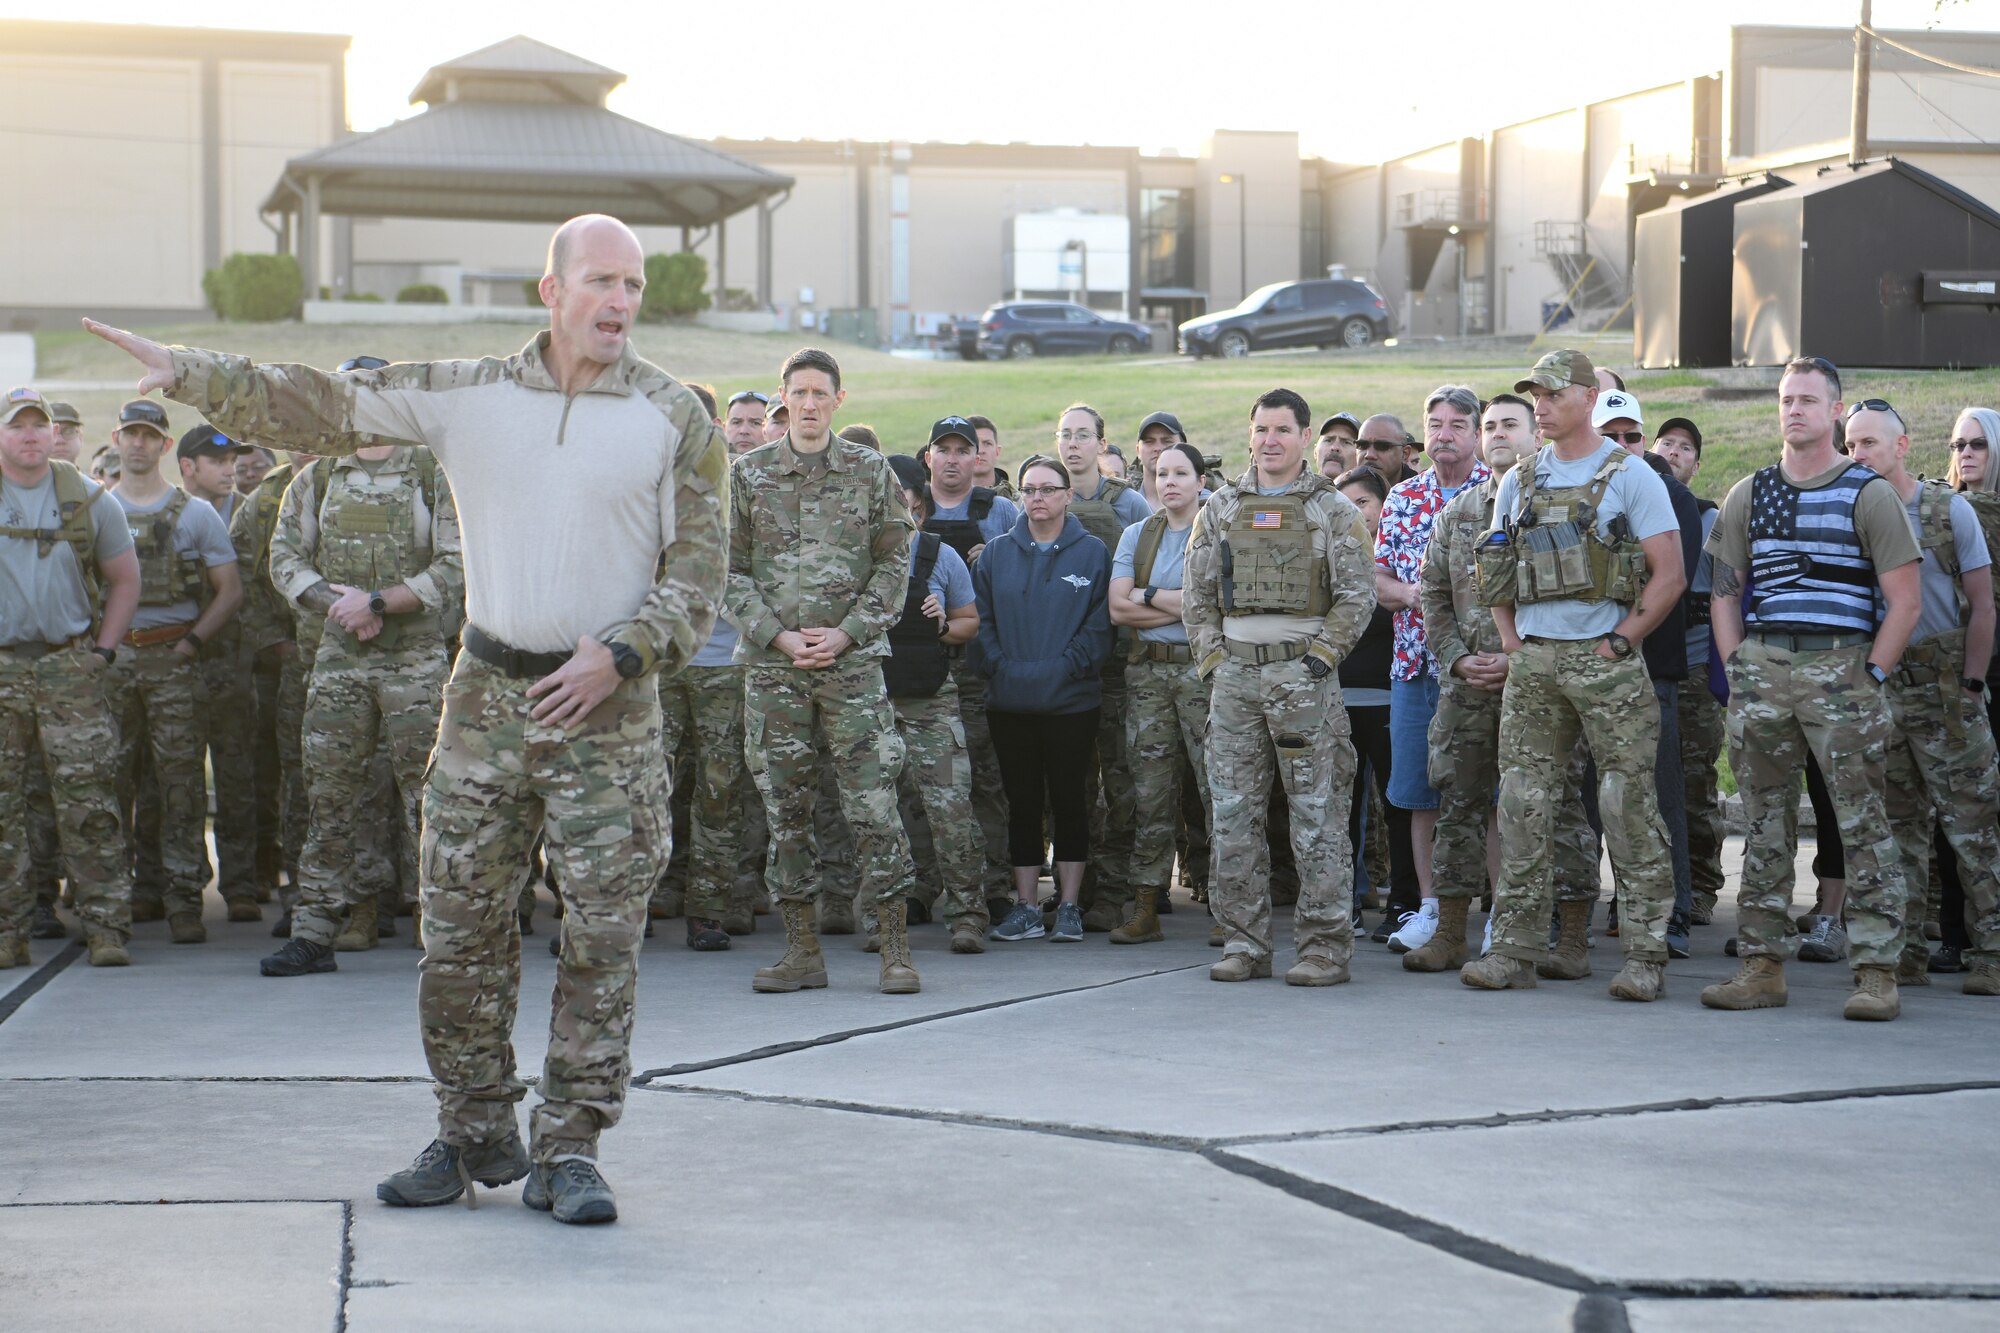 U.S. Air Force Col. Mason Dula, Special Warfare Training Wing commander, discusses the sequence of events and safety procedures prior to a two and one-half mile ruck march during a rededication ceremony in honor of U.S. Air Force Lt. Col. William Schroeder and U.S. Air Force Staff Sgt. Scott Sather at the SWTW training compound Joint Base San Antonio, Chapman Training Annex, Apr. 8, 2022.  The wing and echelon units hosted a two and one-half mile ruck march followed by Memorial pushups and the unveiling of refitted memorials in coordination with Gold Star families (U.S. Air Force photo by Brian Boisvert)